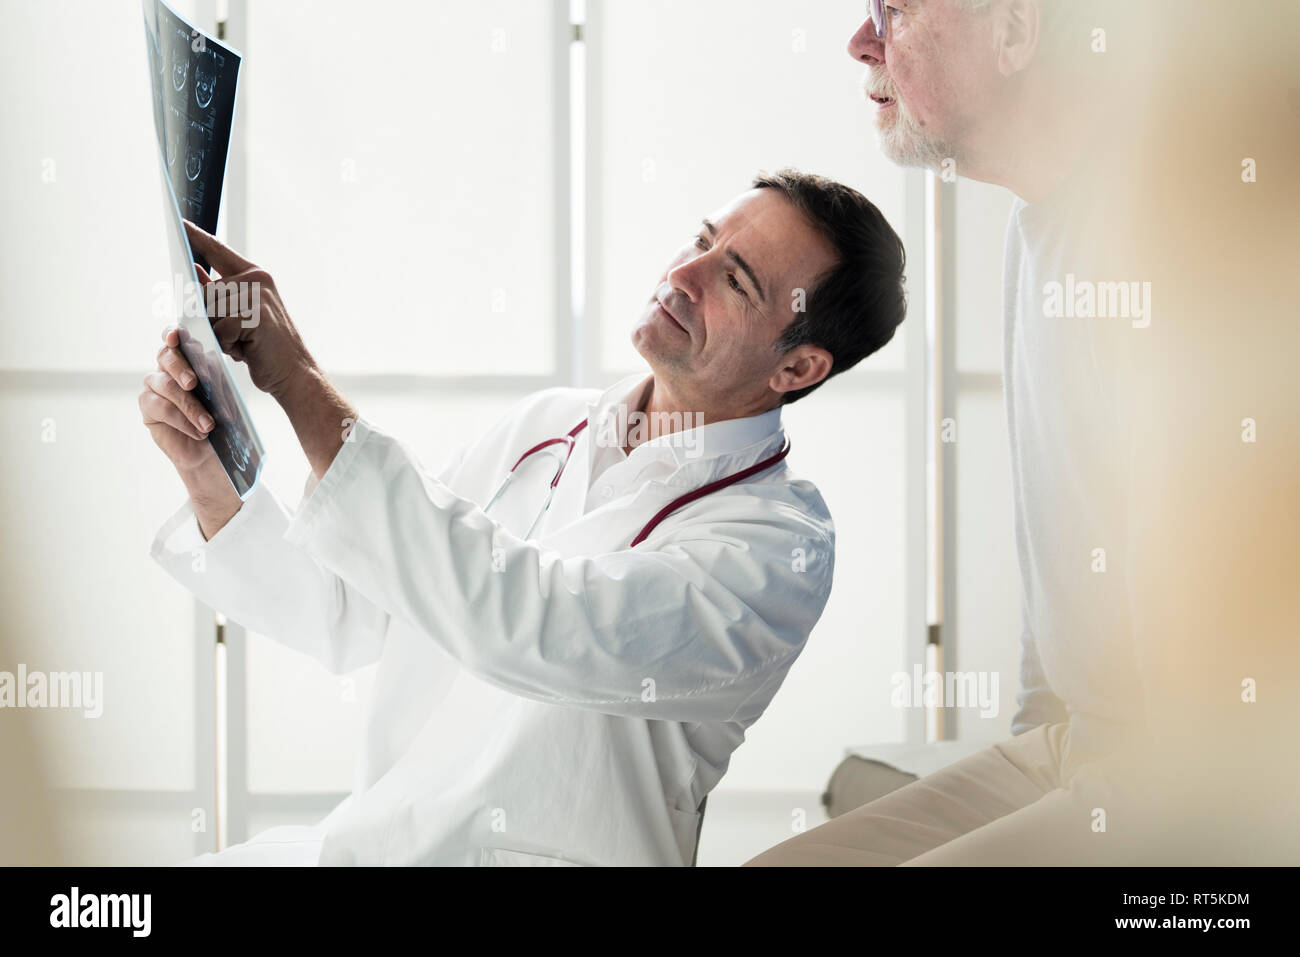 Doctor discussing MRT image with patient in medical practice Stock Photo